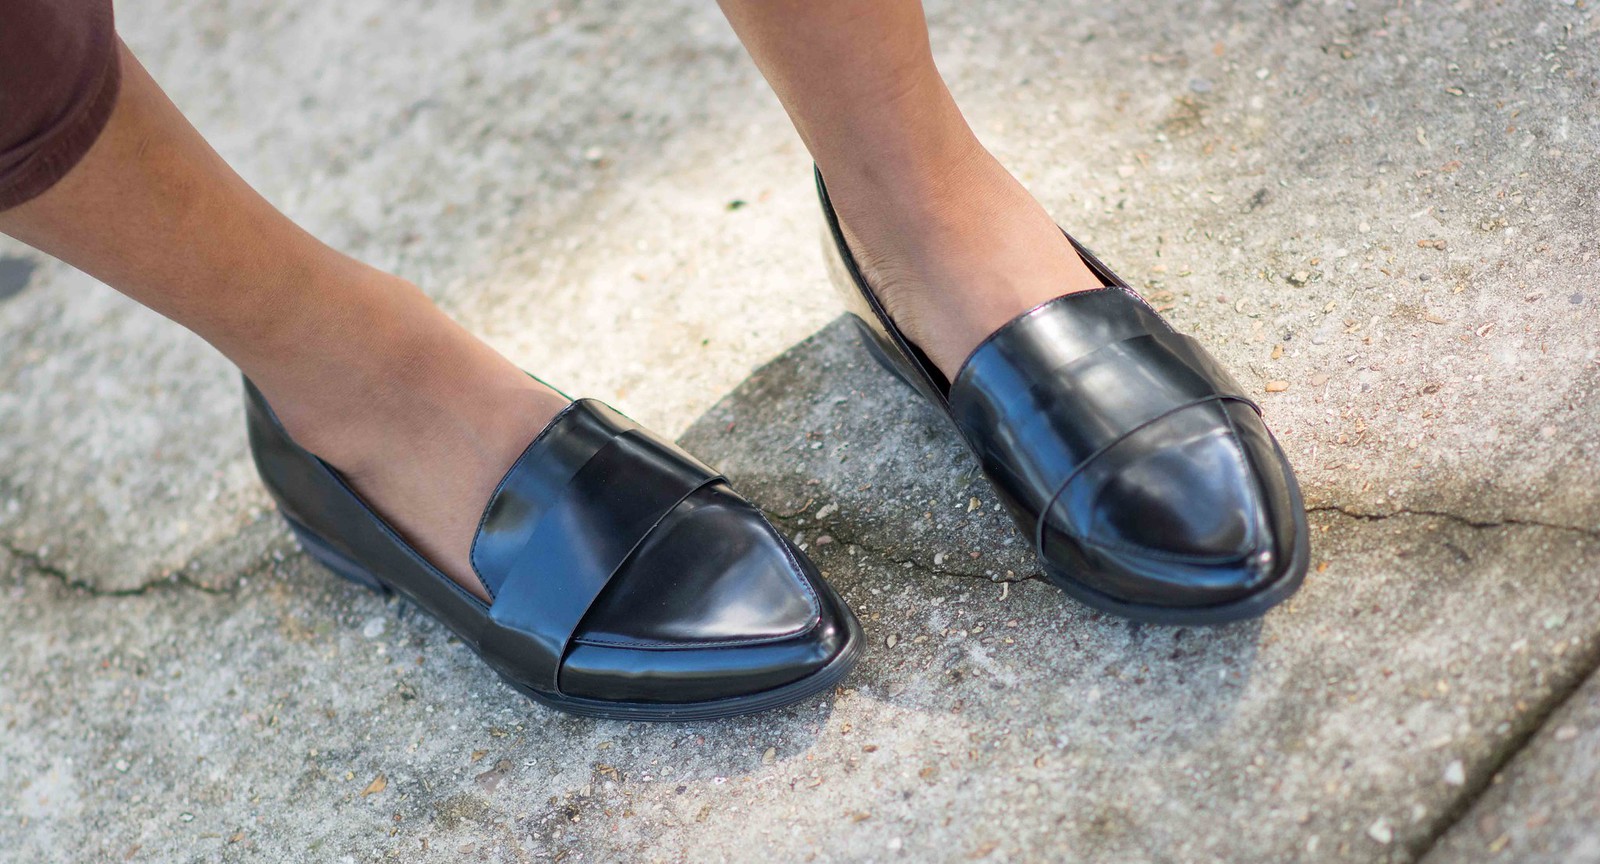 patent loafers black loafers tomboy fashion